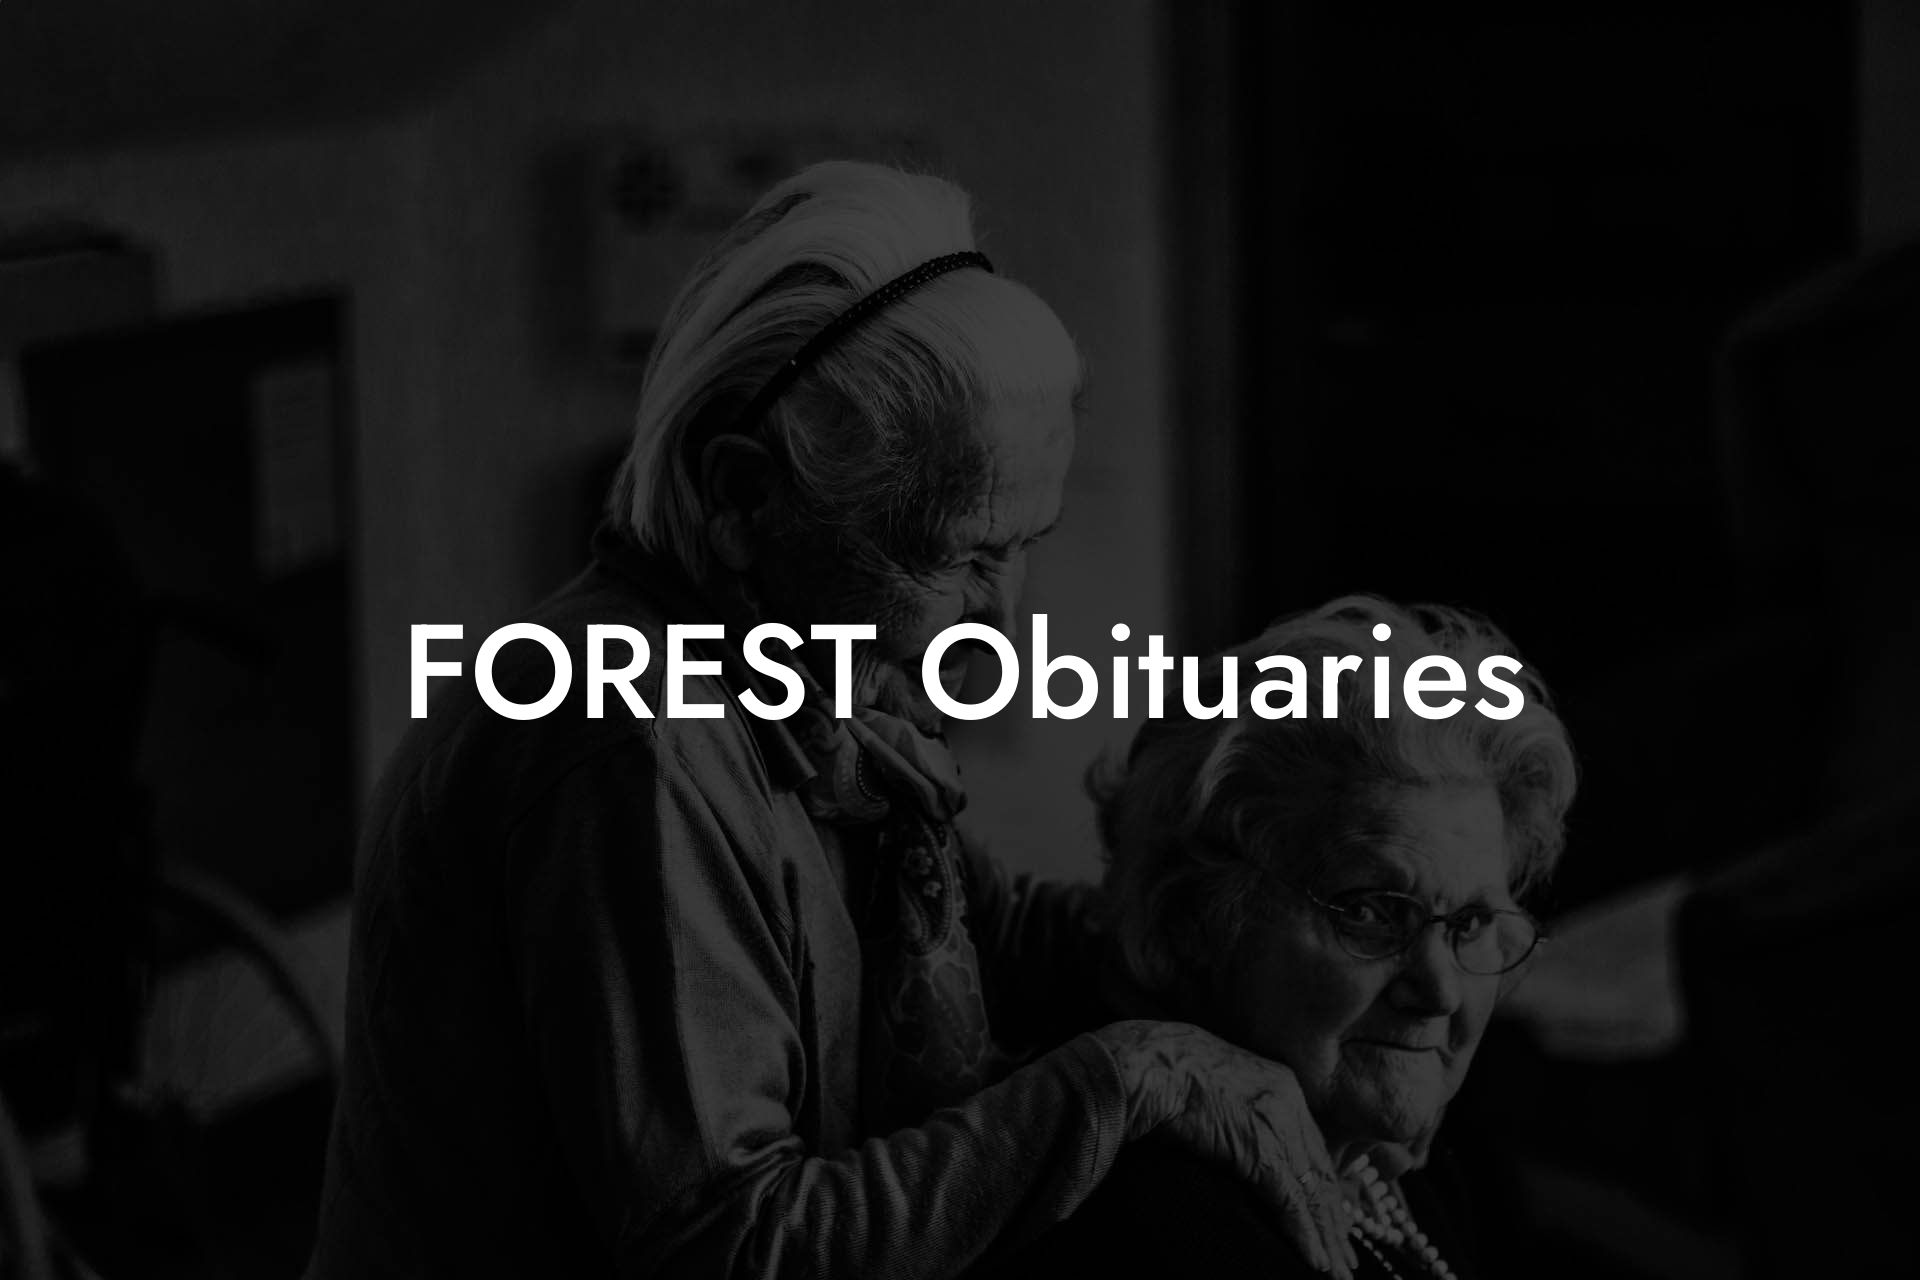 FOREST Obituaries